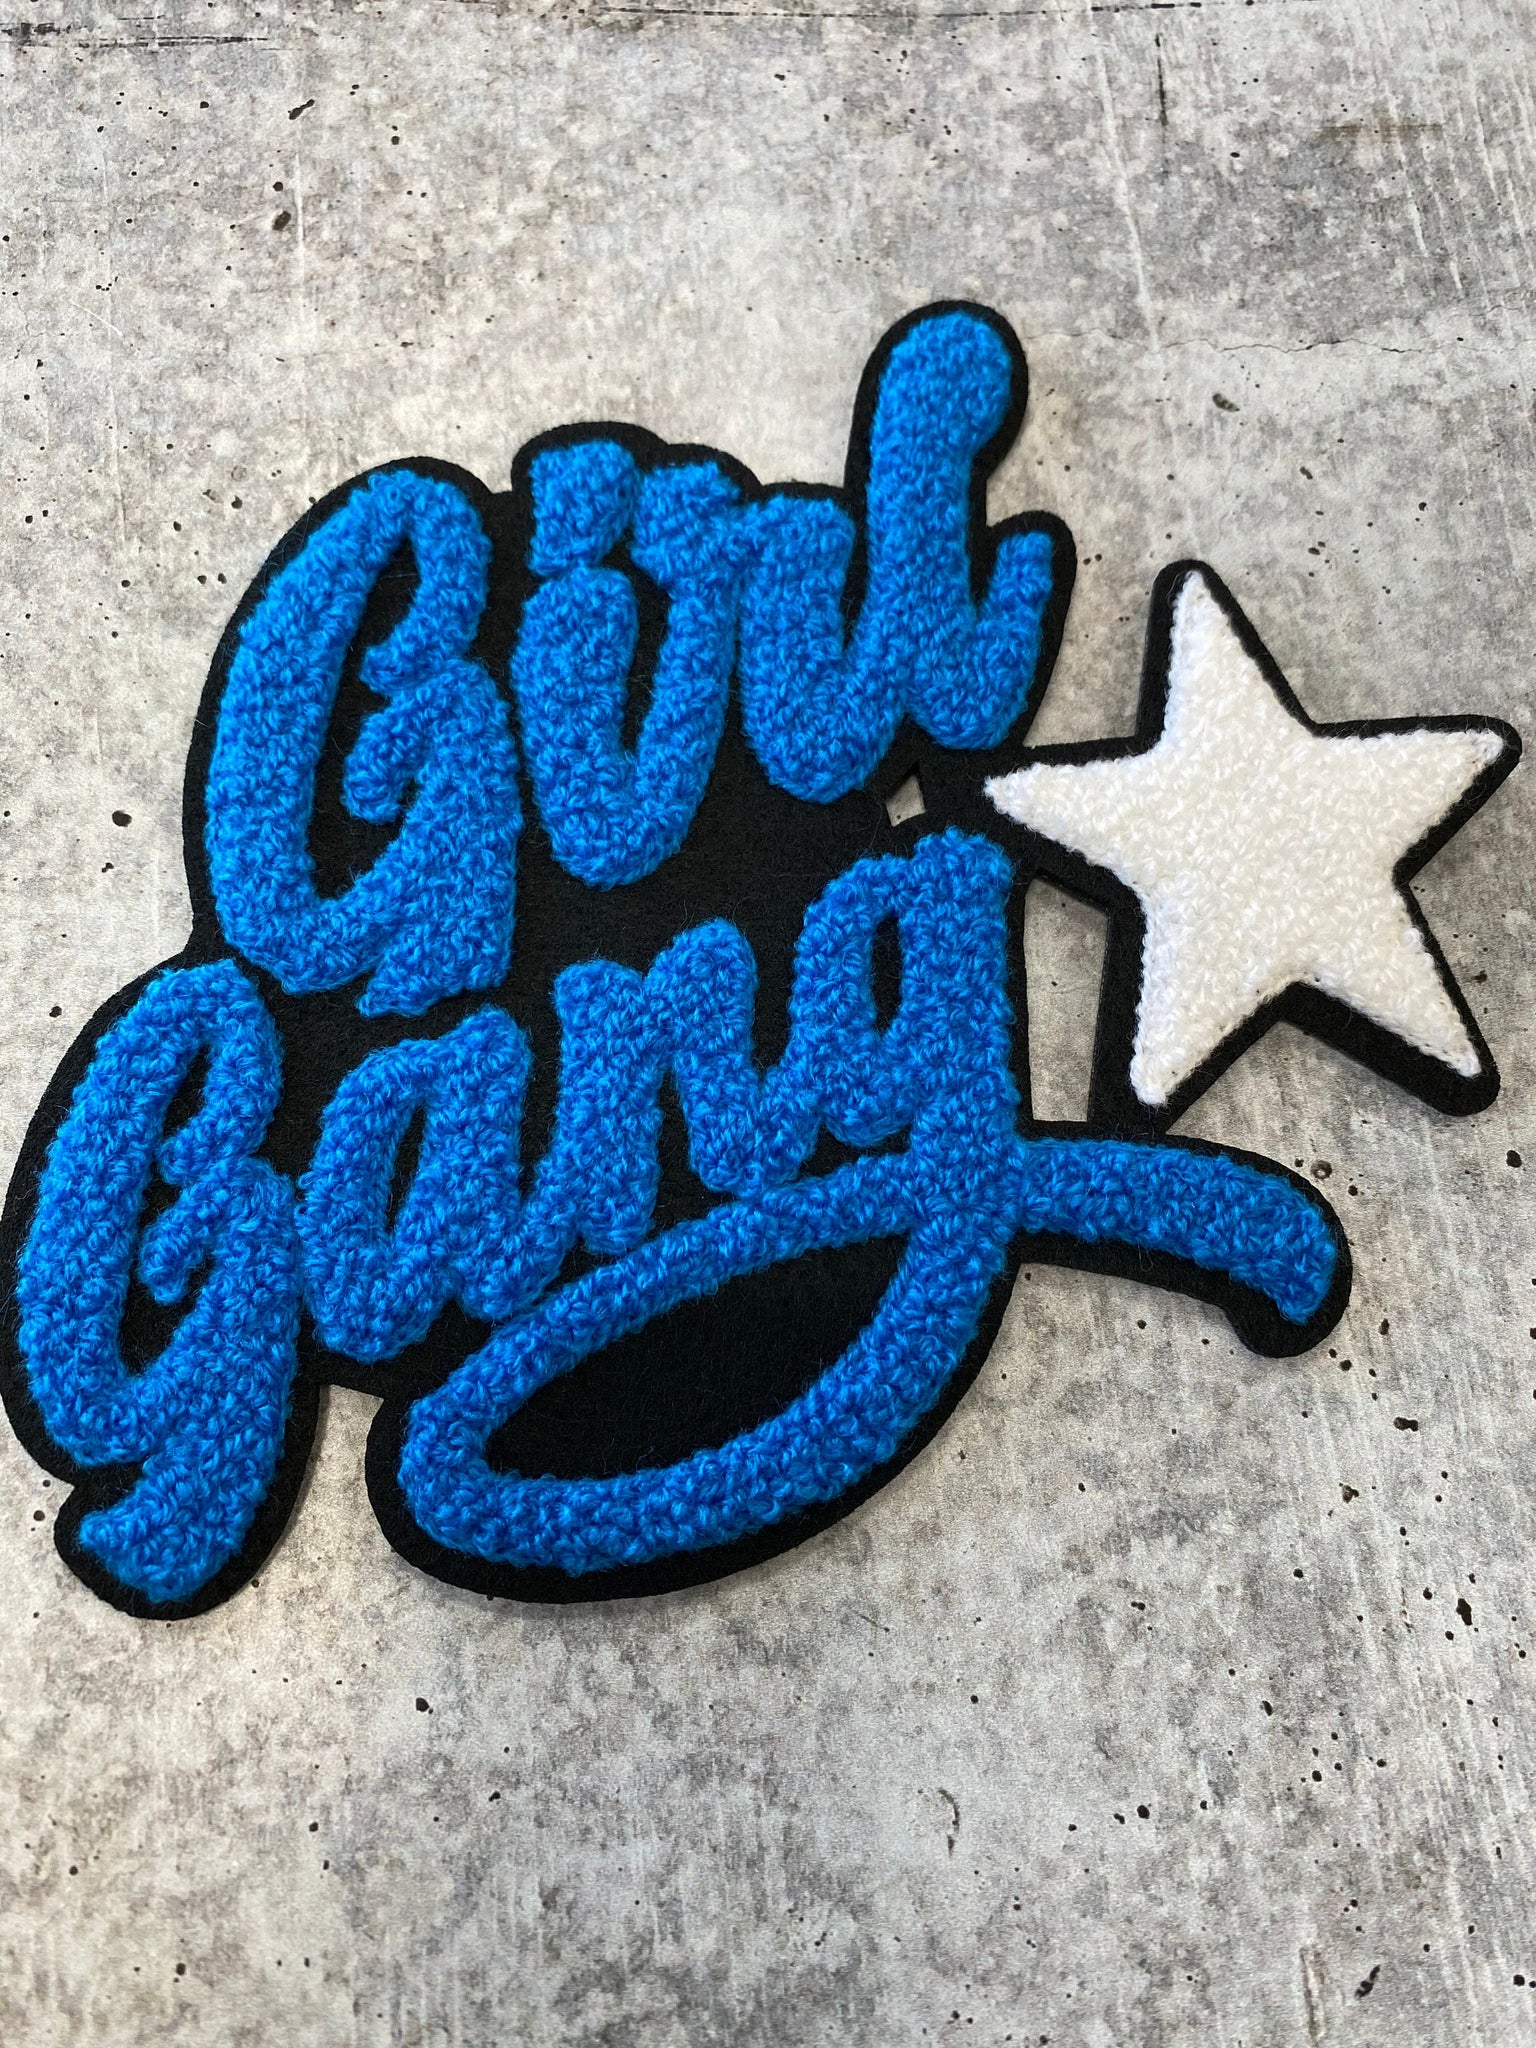 Blue w/White Star "Girl Gang" Chenille Patch, Colorful, Varsity Vintage Patch for DIY Crafts, Large Back Patch for Clothing, Iron-on